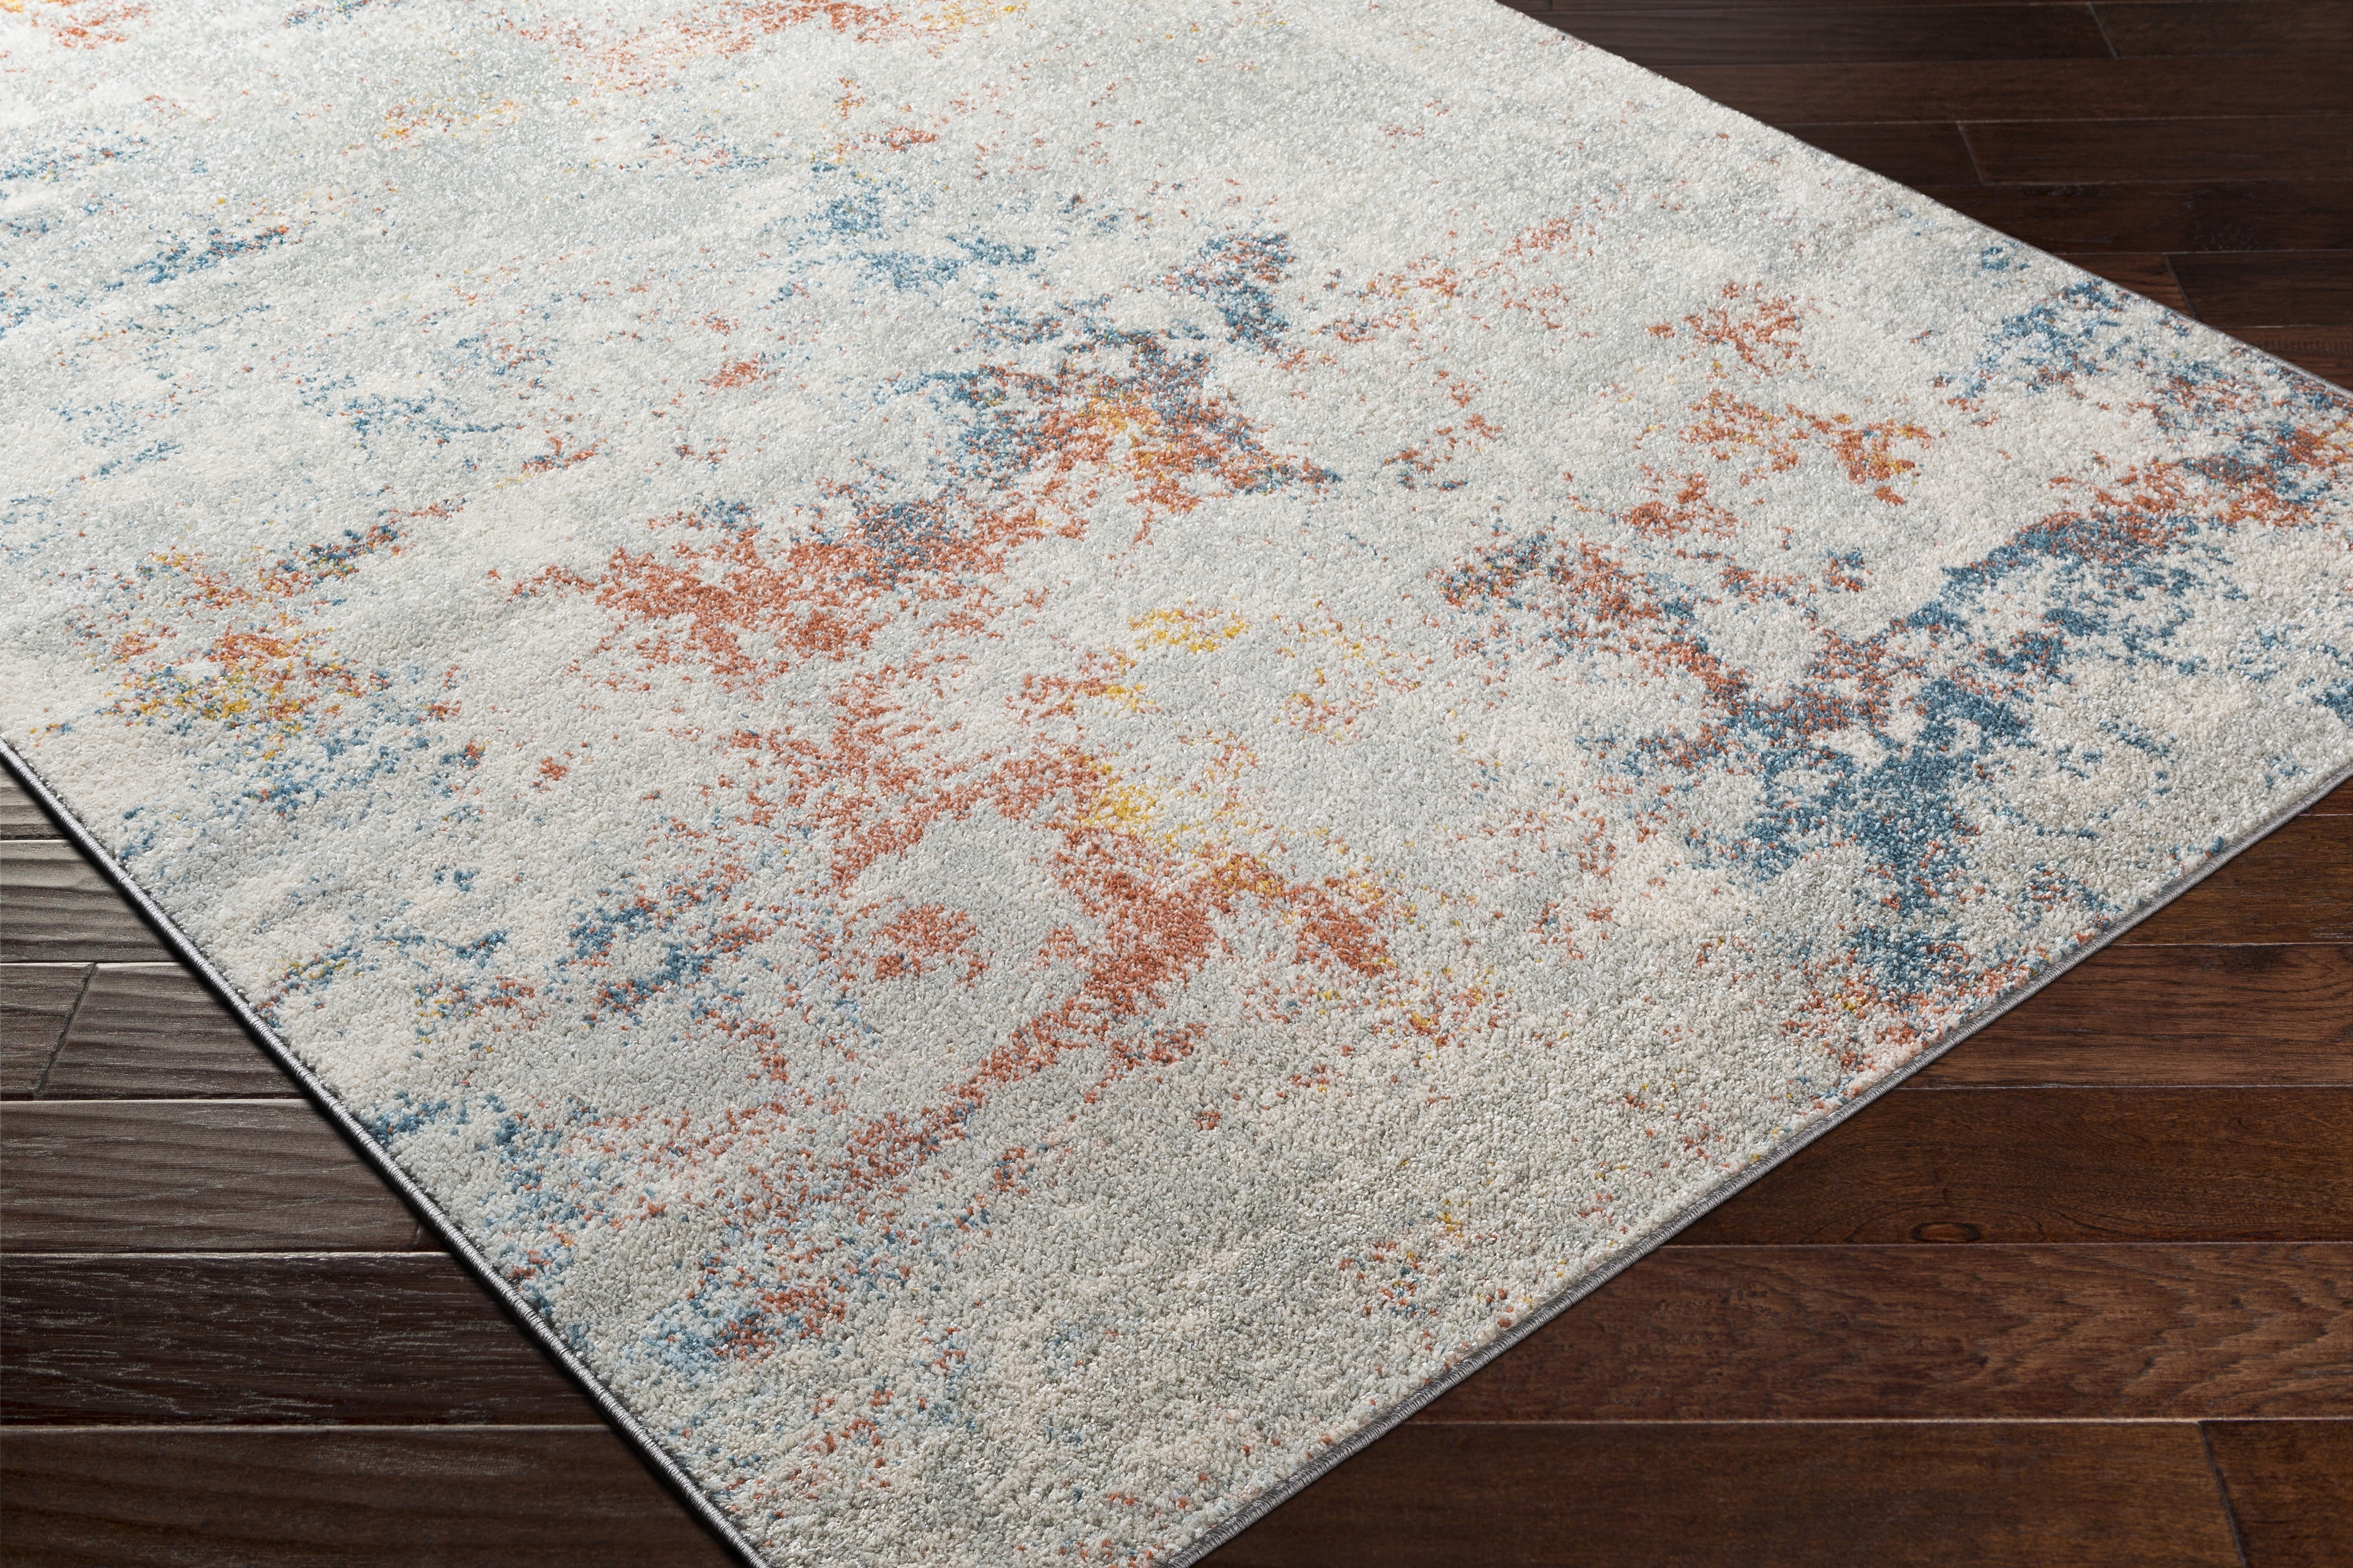 Chester Rug, 6'7" x 9' - Image 1